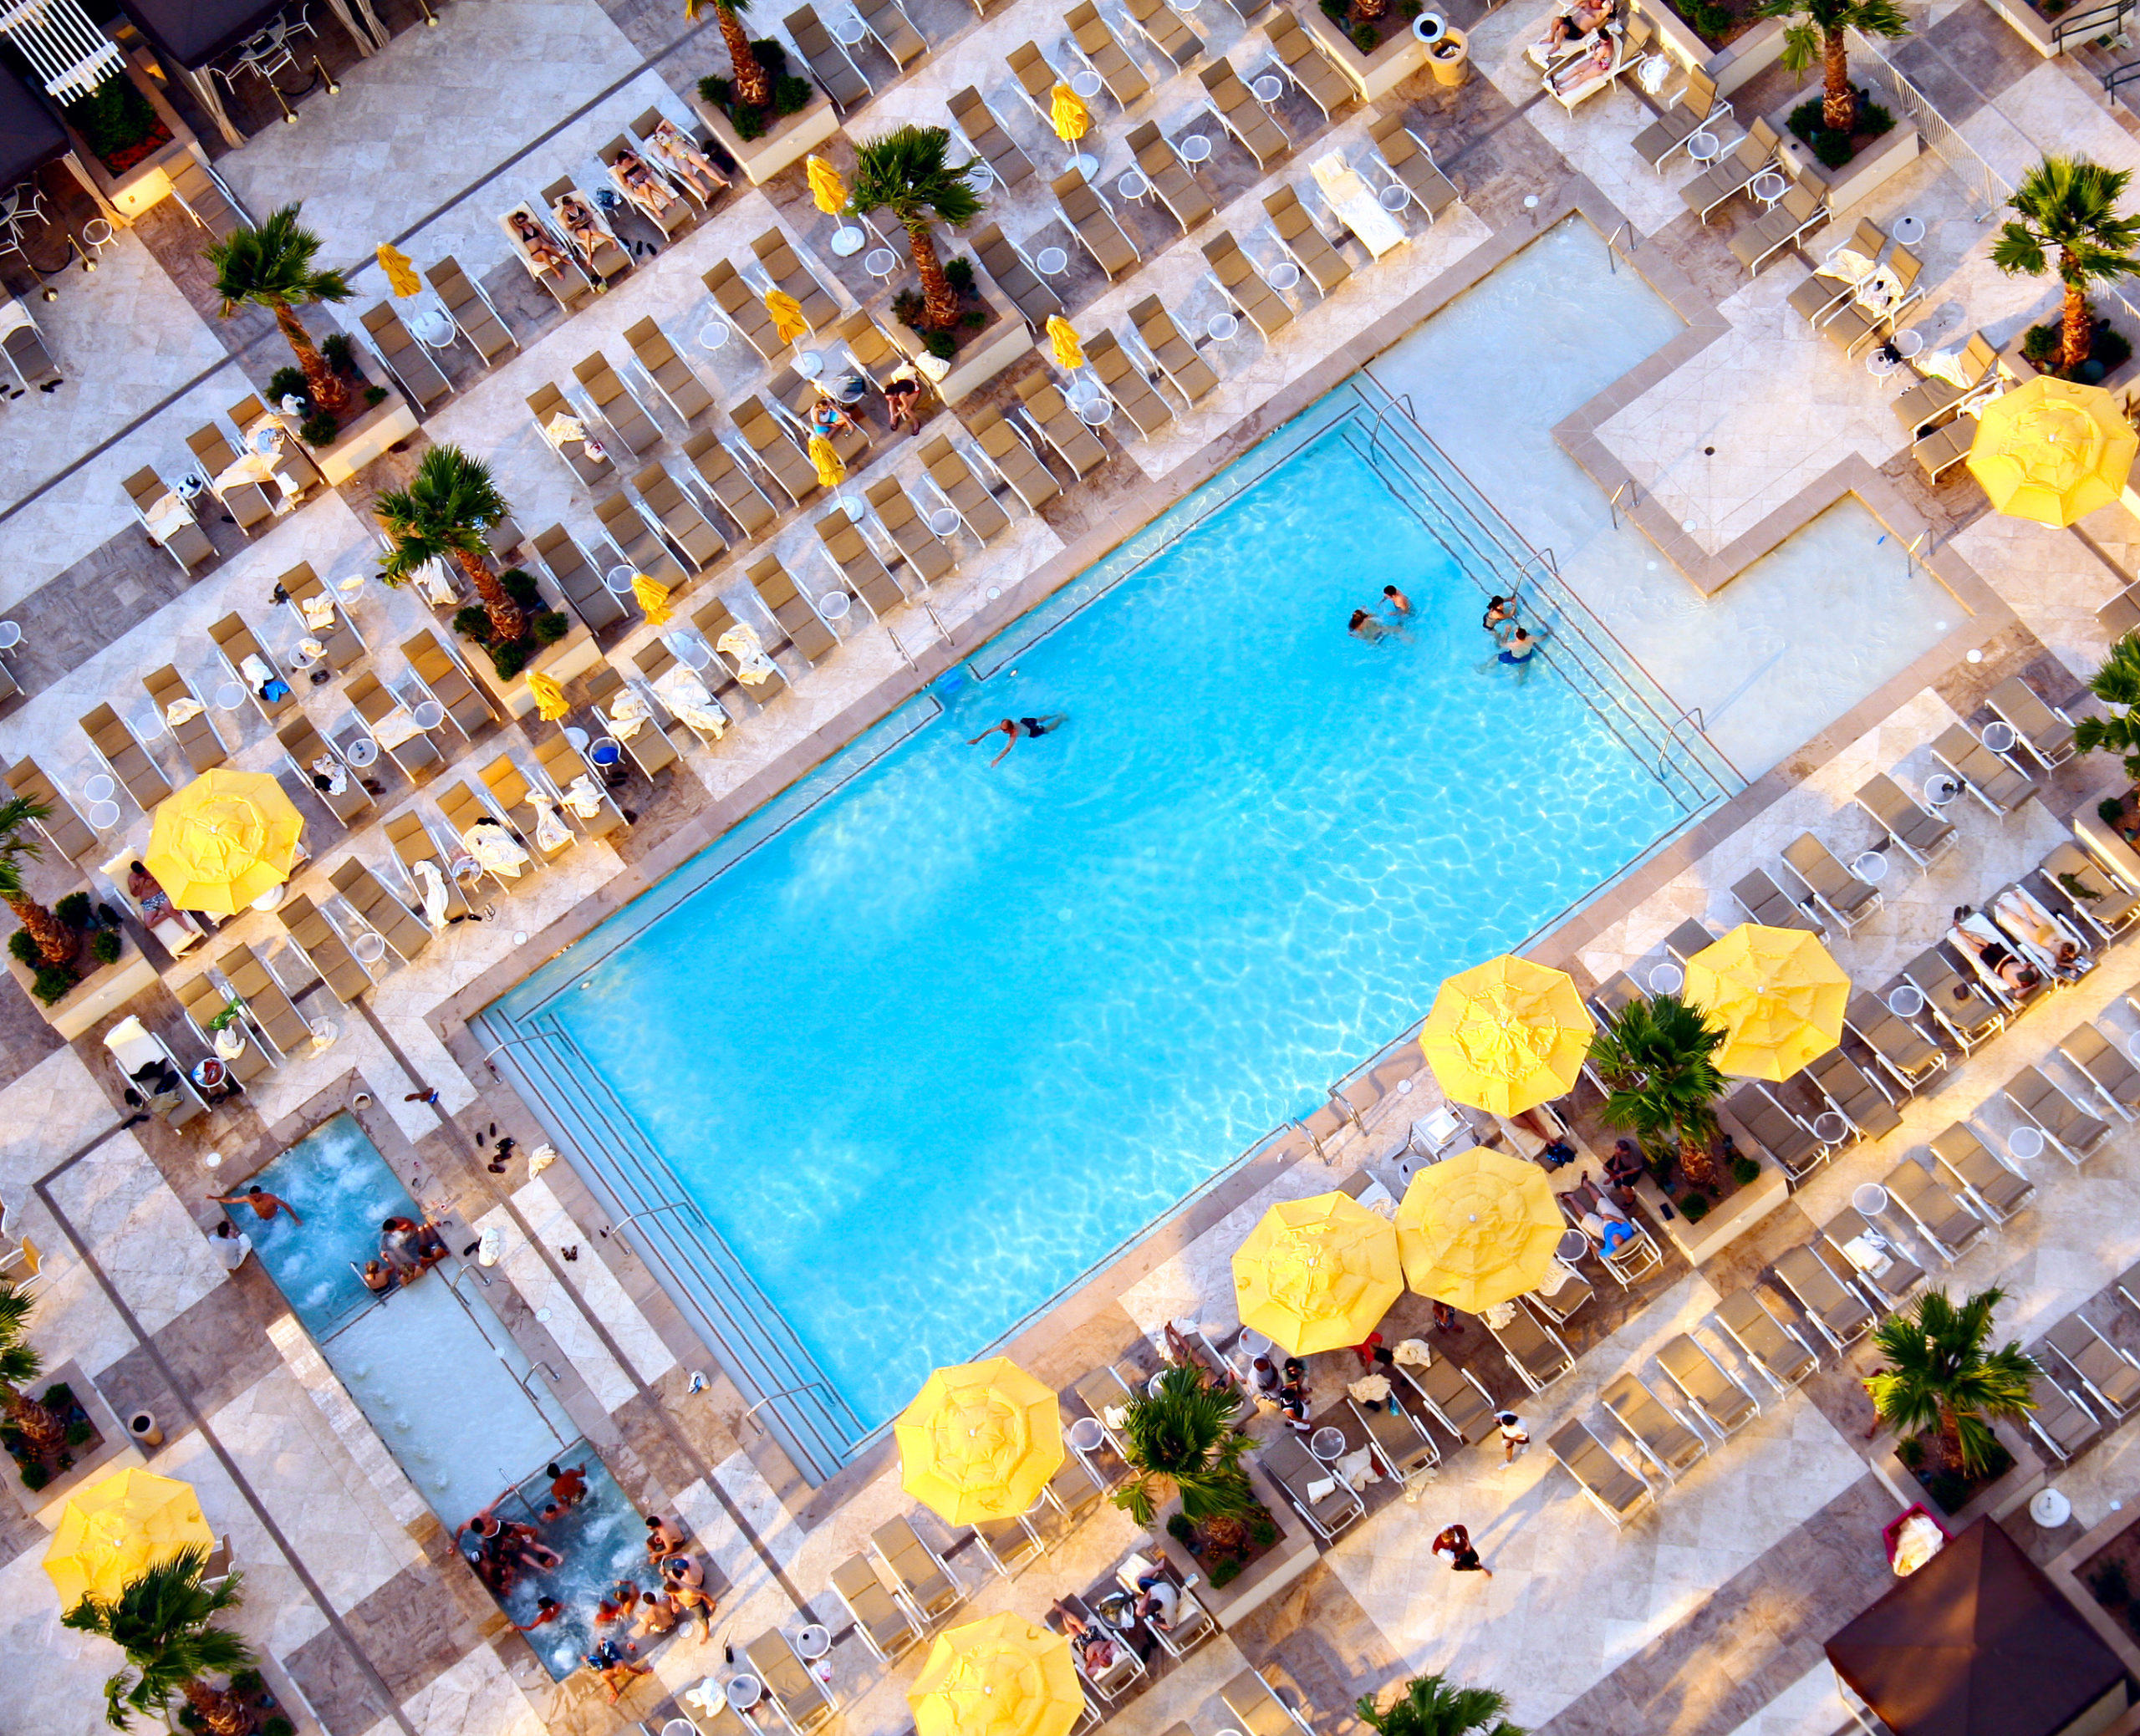 An aerial view of a pool, captured from above, providing a unique perspective of the pool and its surroundings